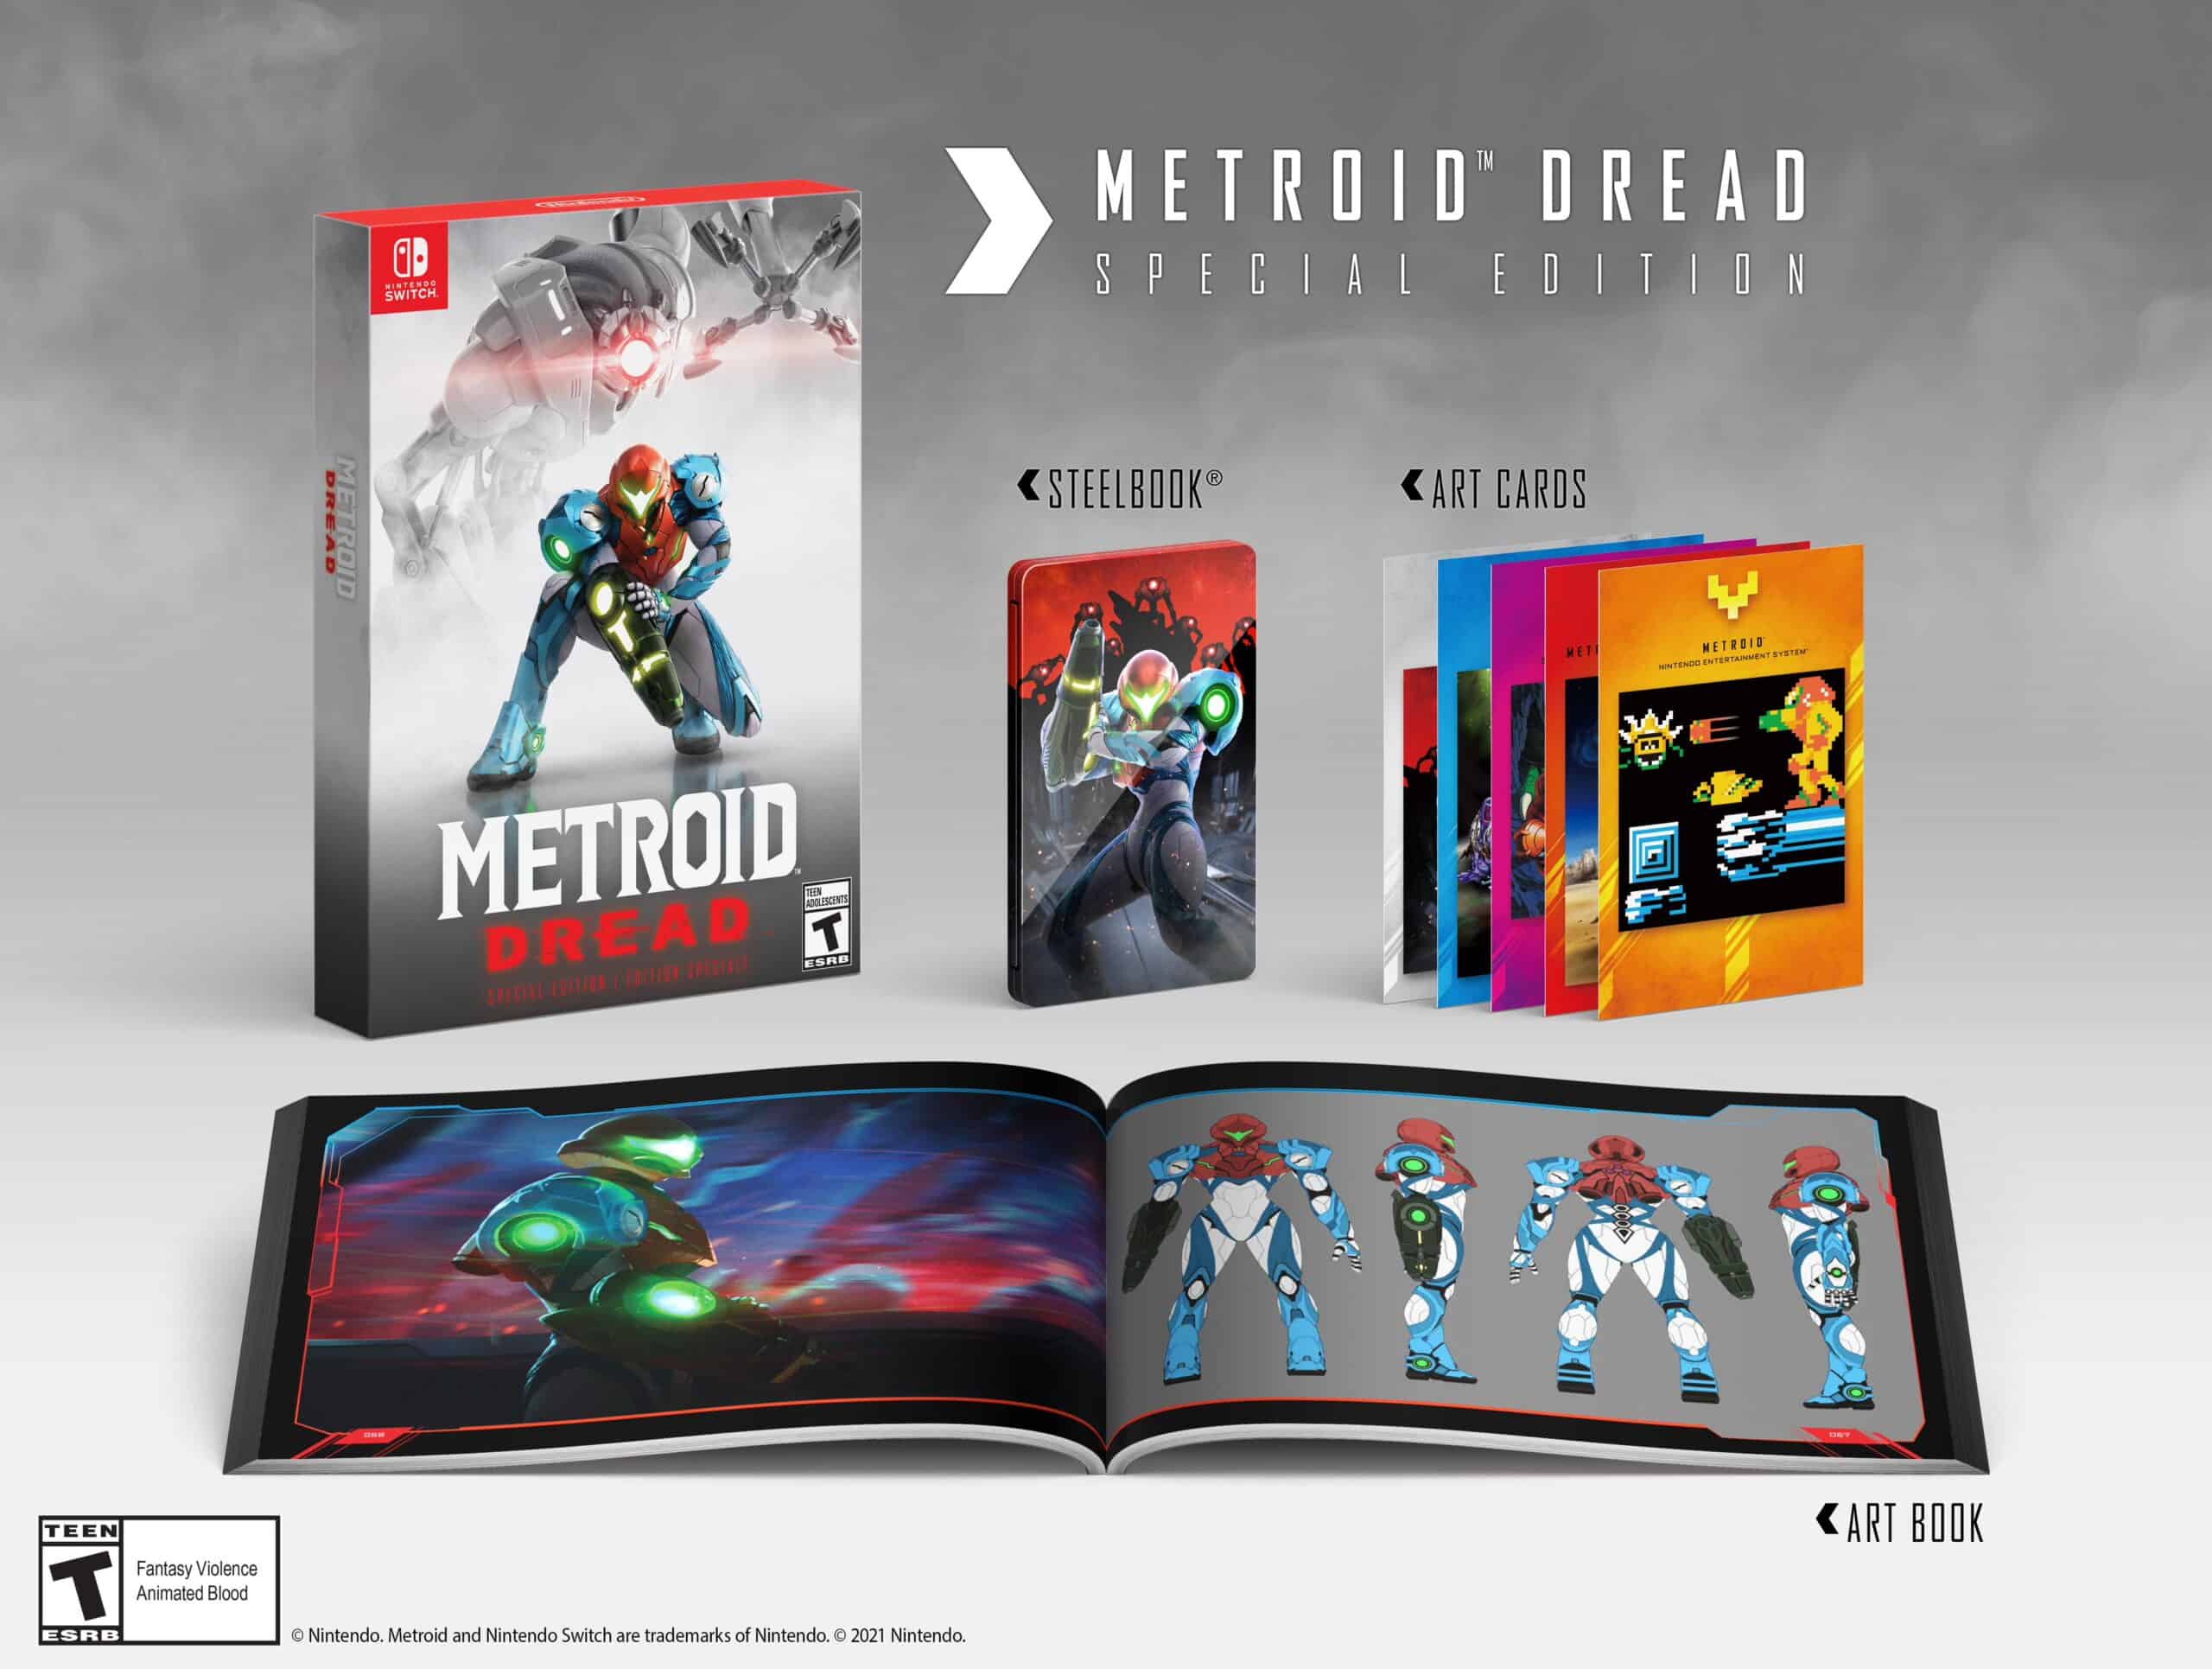 Metroid Dread Special Edition revealed for Switch